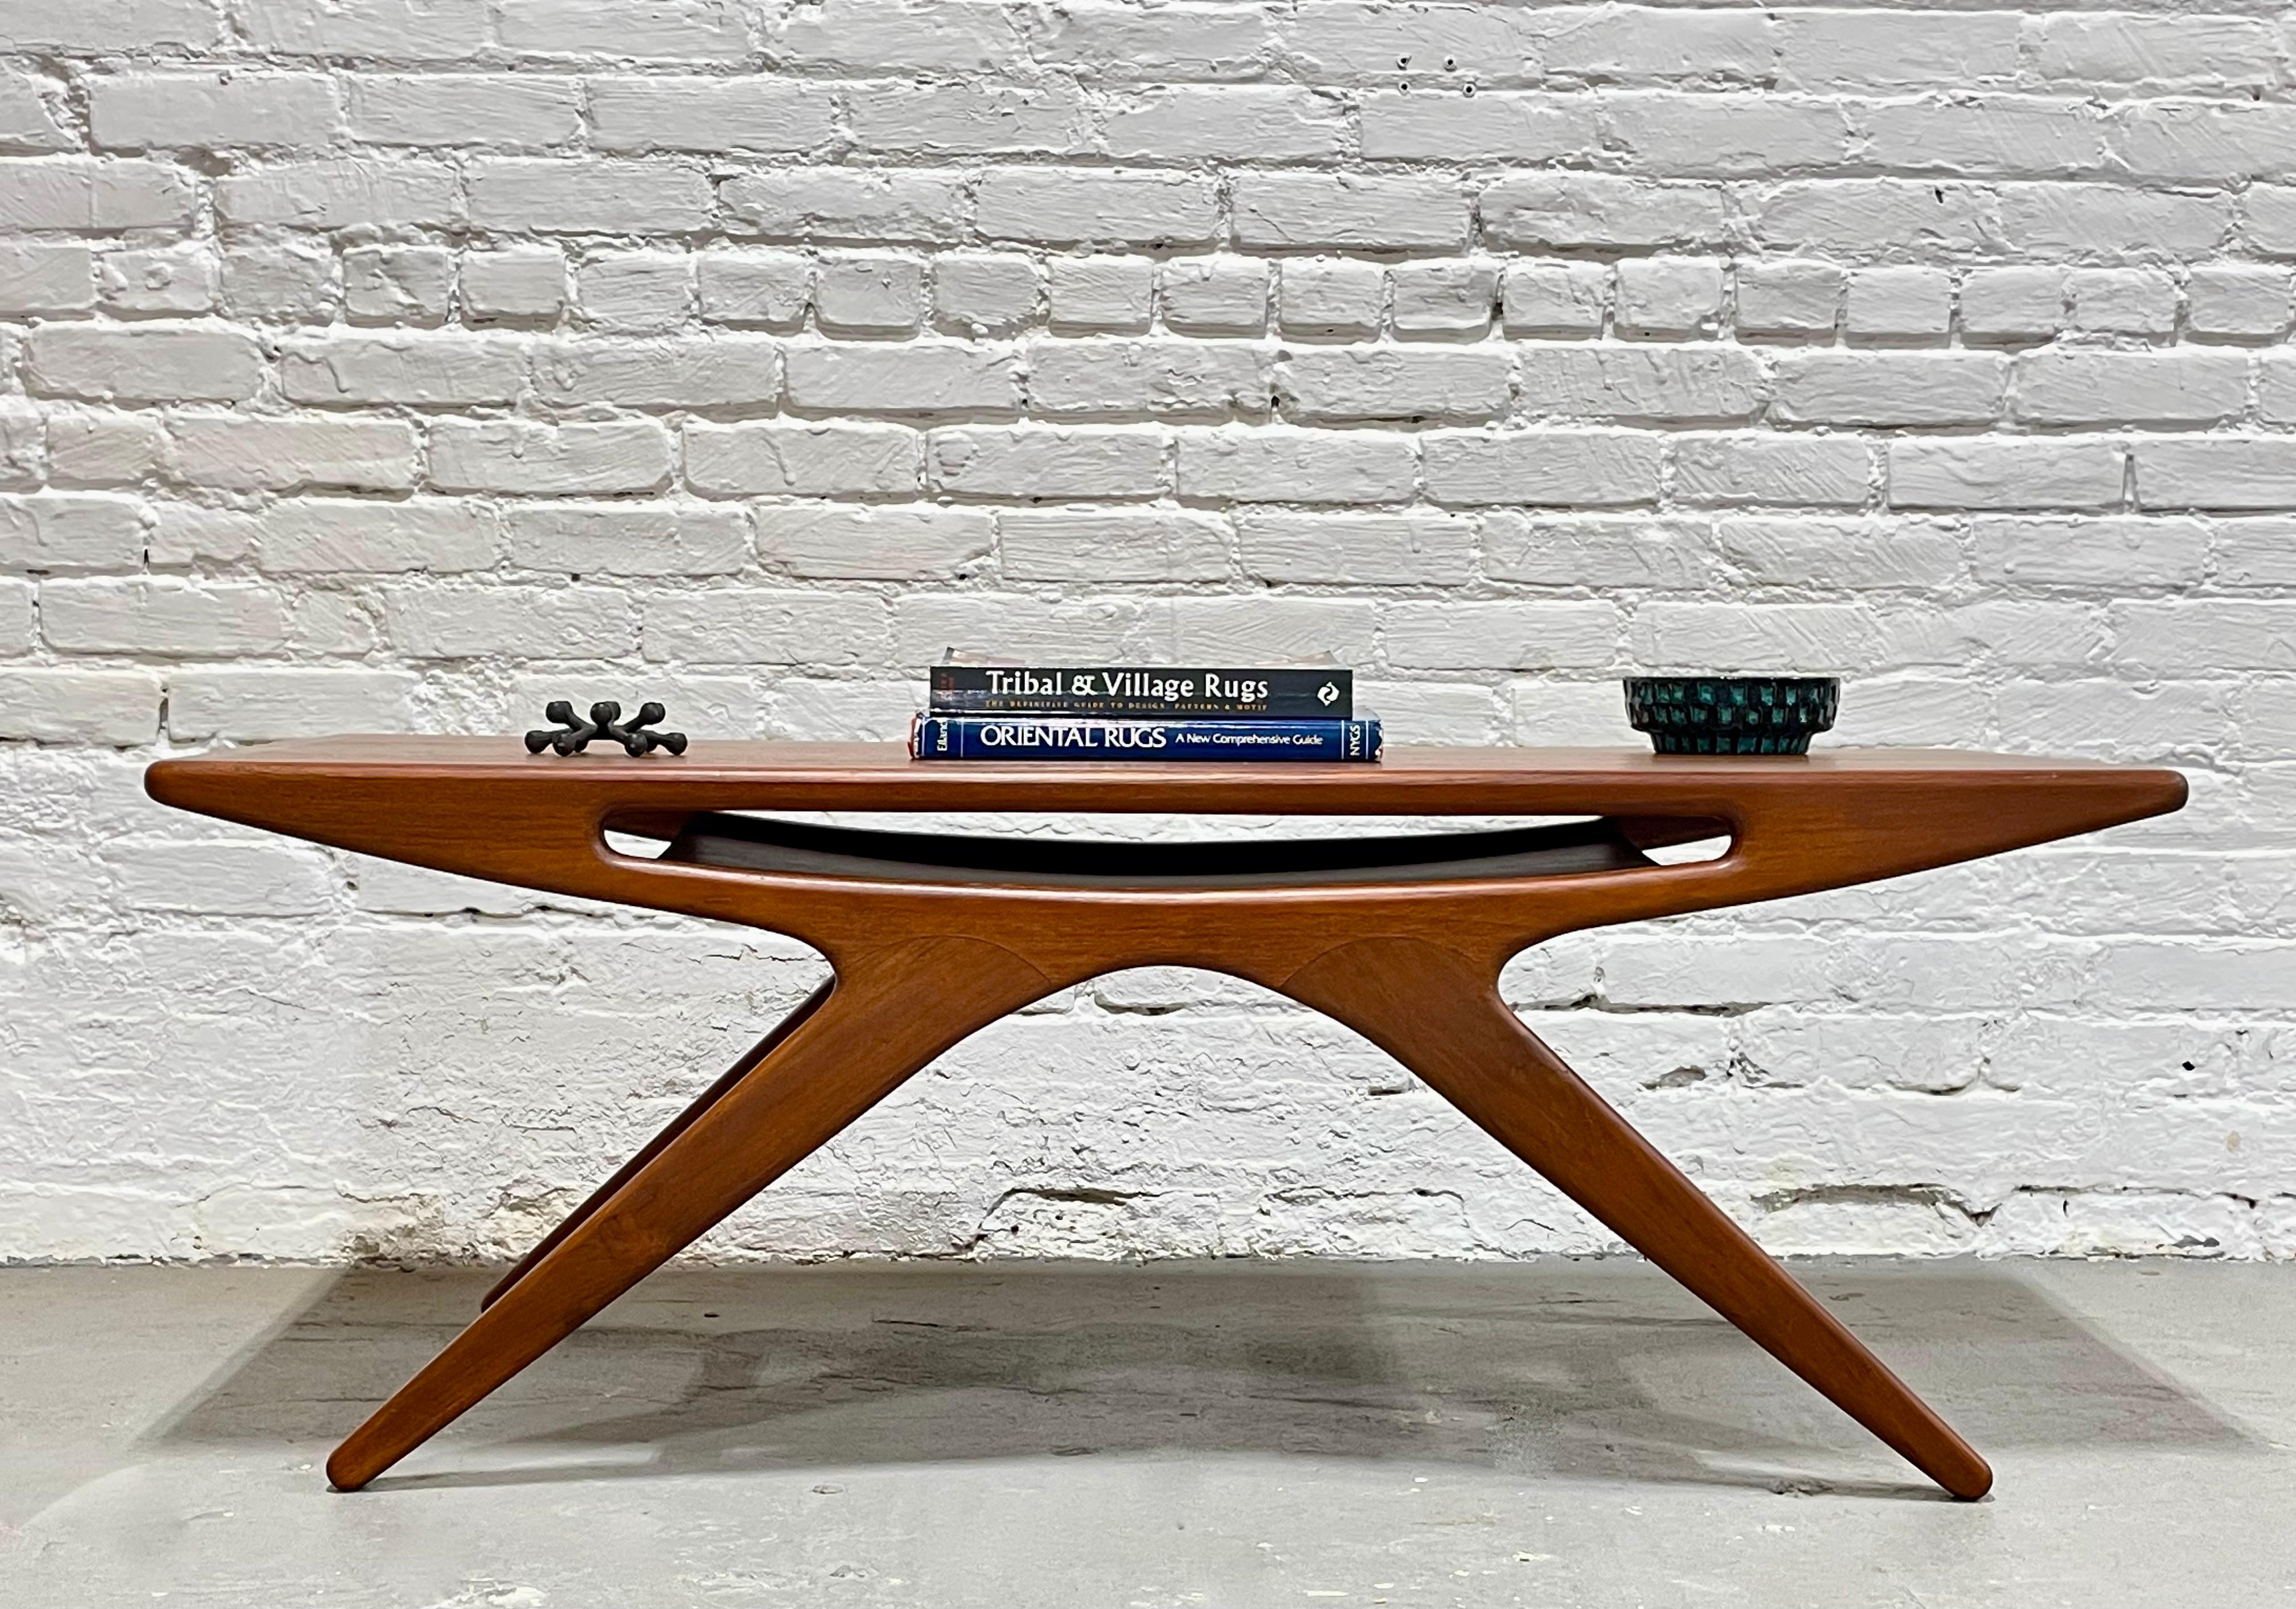 Phenomenal Mid-Century Modern styled Handmade Teak Coffee Table featuring unbelievable lines and gorgeous design. Interior compartment allows for magazine or book storage. Super high quality workmanship, handmade from reclaimed teak.